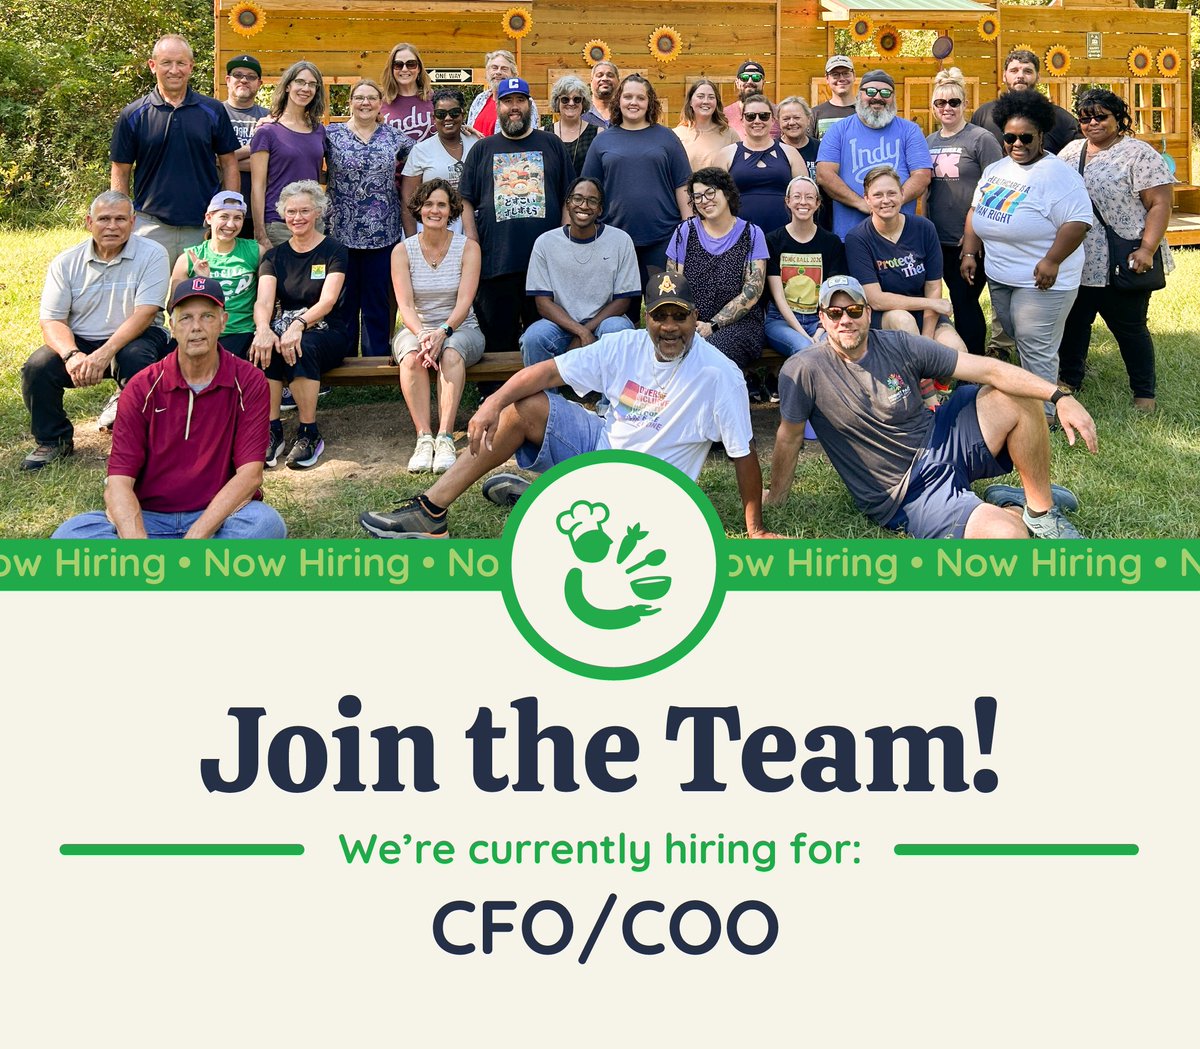 We're hiring a CFO/COO, who will lead key administrative areas, including Finance, Human Resources, Facilities, Information Systems/Technology and Data, and related internal operations and processes. The application deadline is April 8. secondhelpings.org/now-hiring-cfo…